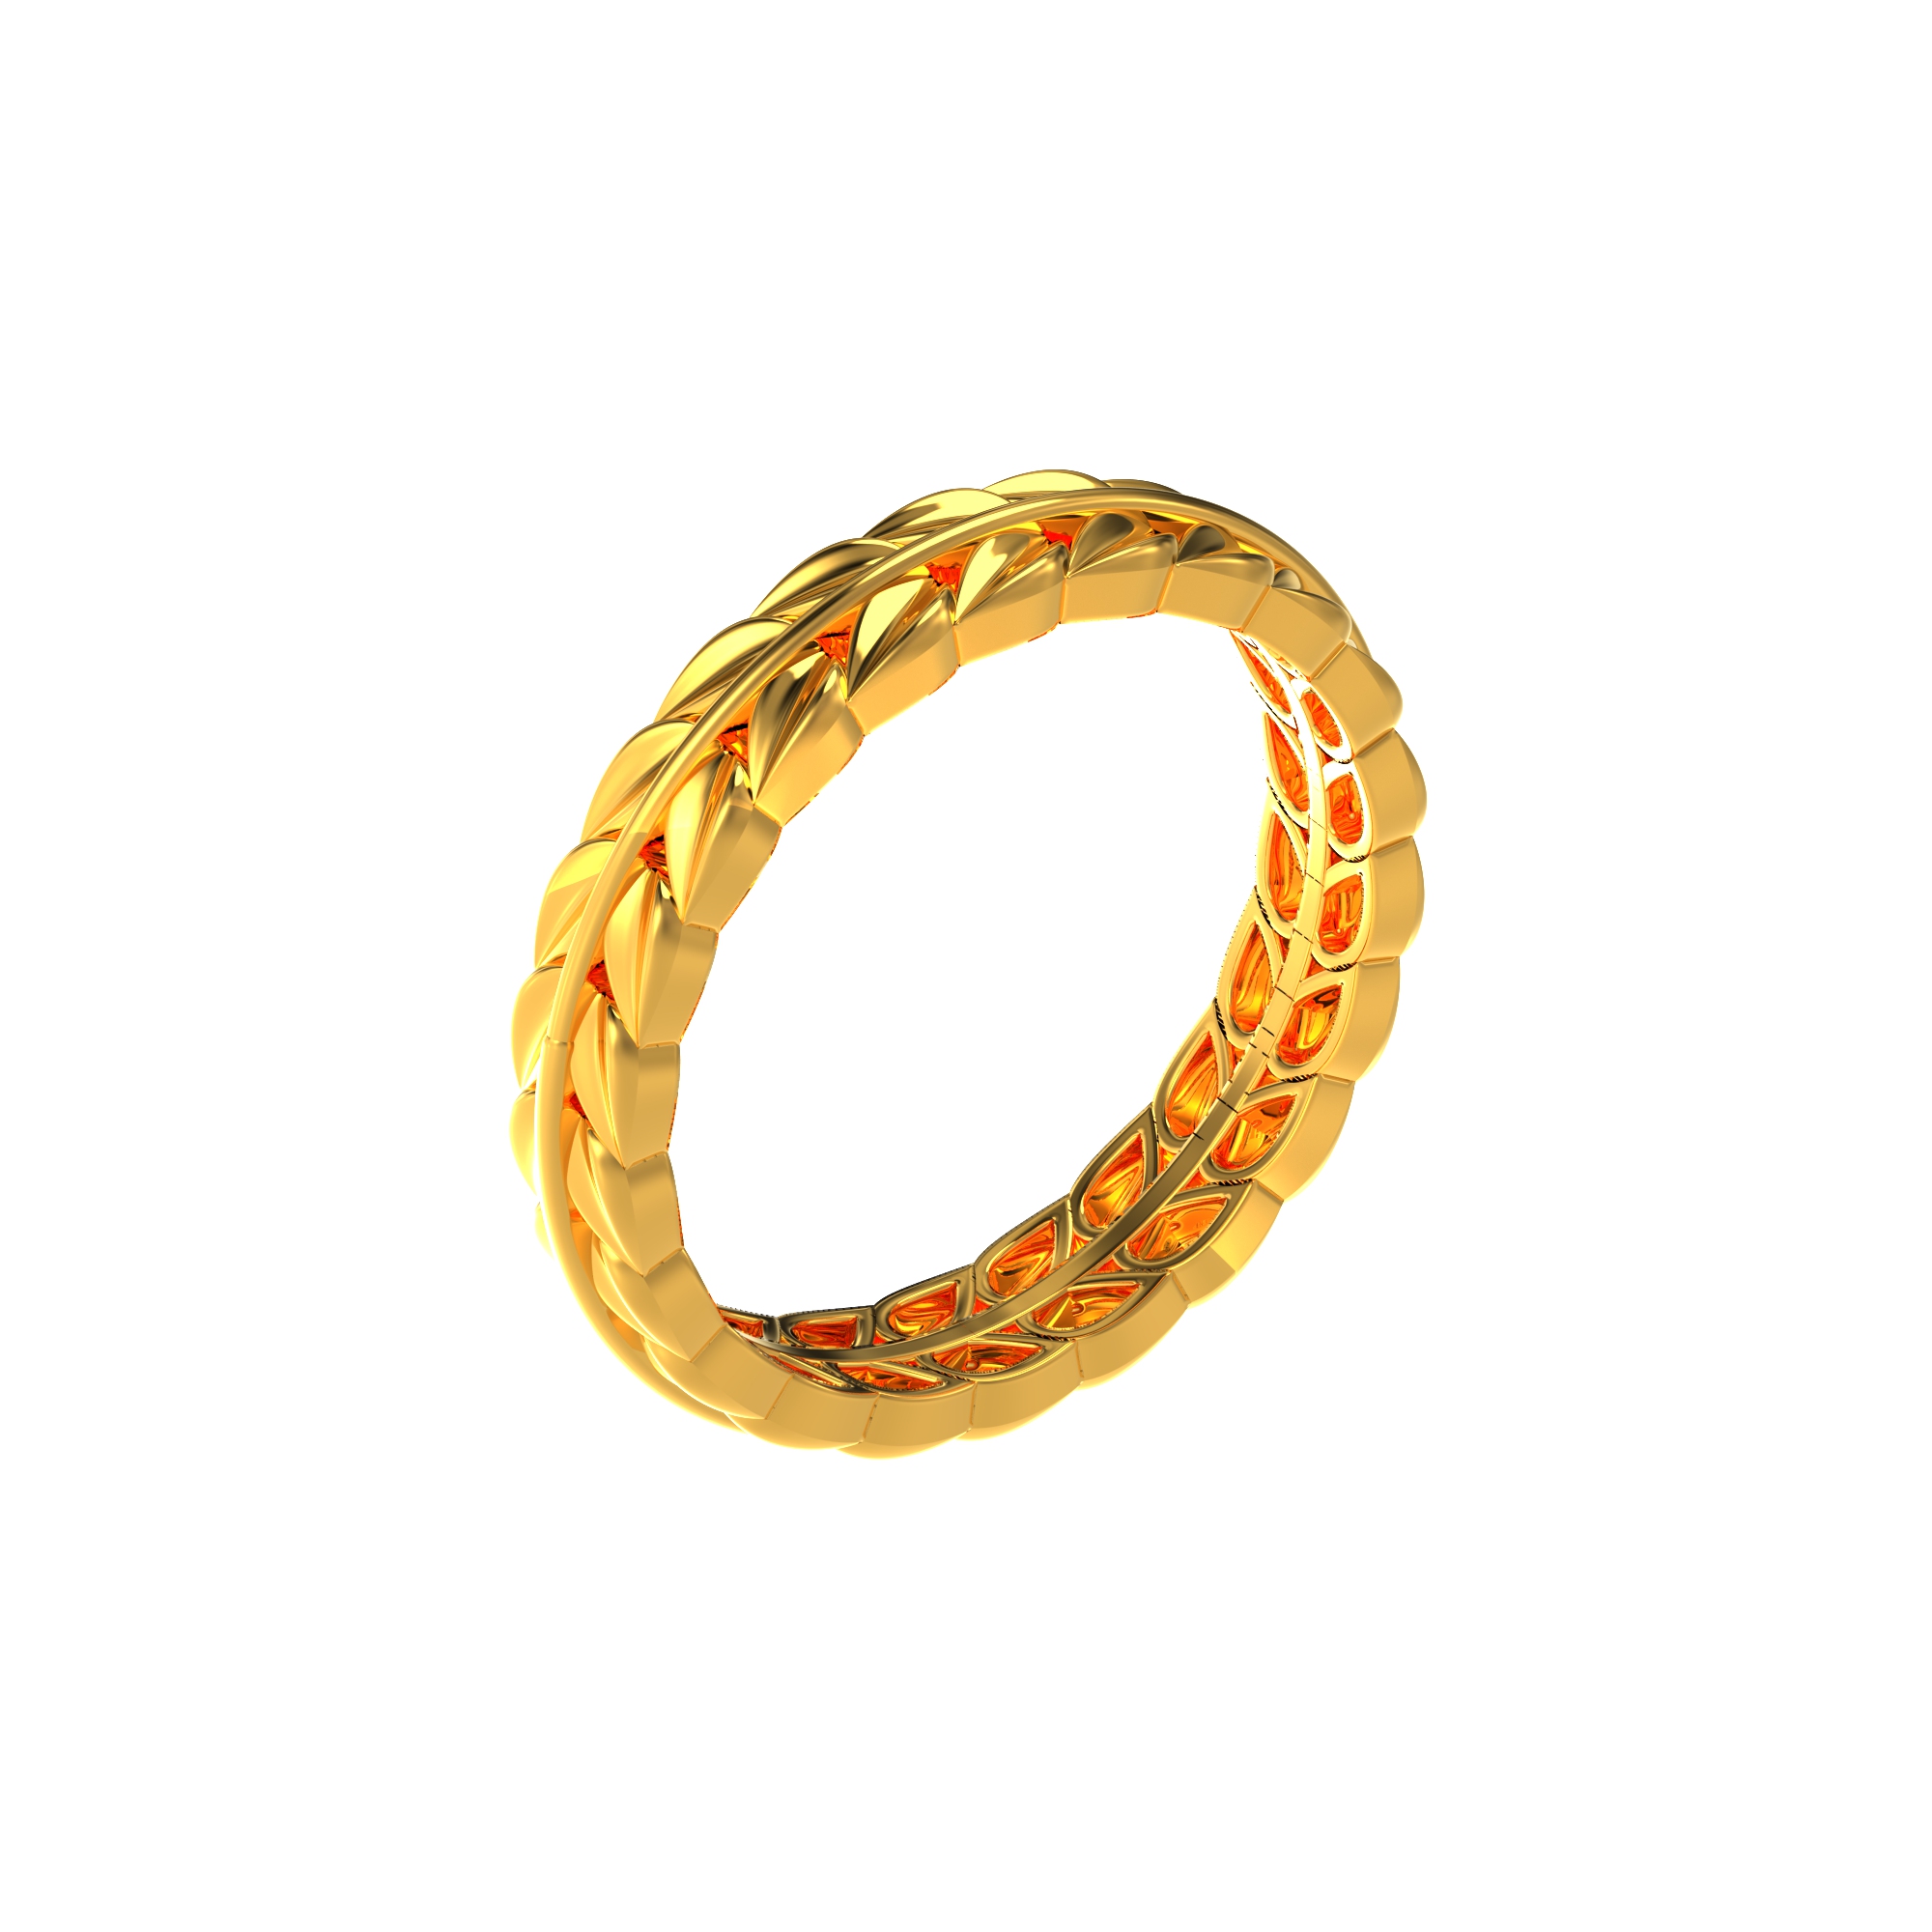 Gold Jewellery Manufacturers and Suppliers in thirumilazai